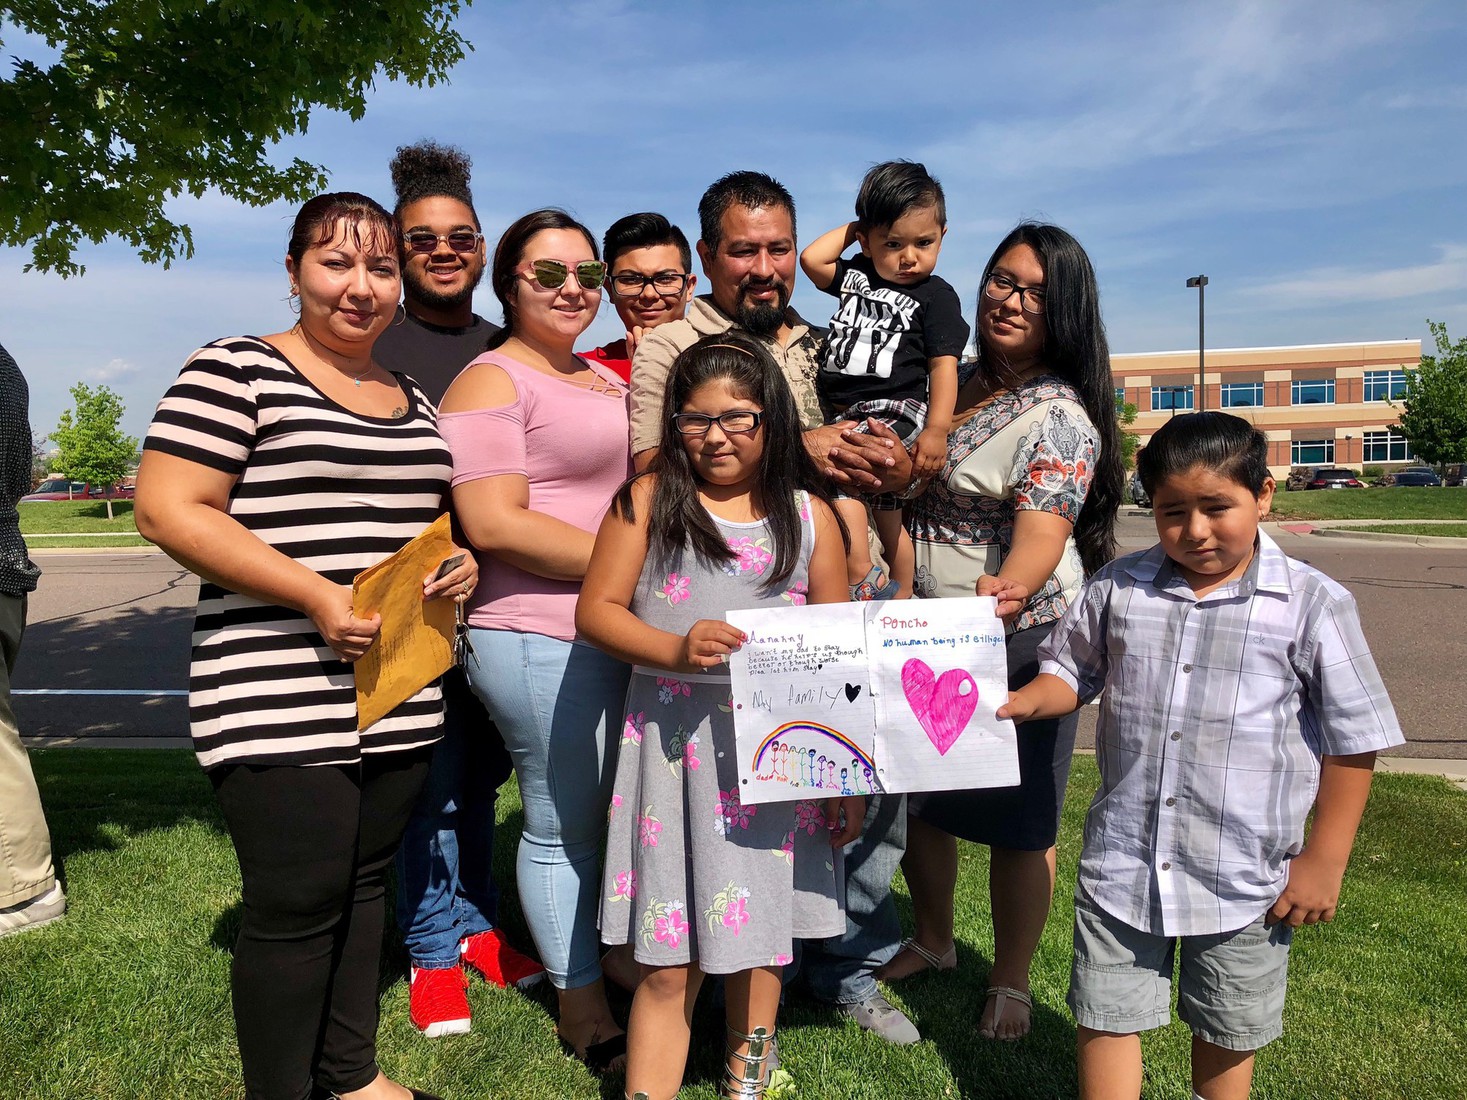 Torn apart by ICE, a Colorado family vows to keep fighting to stay together 